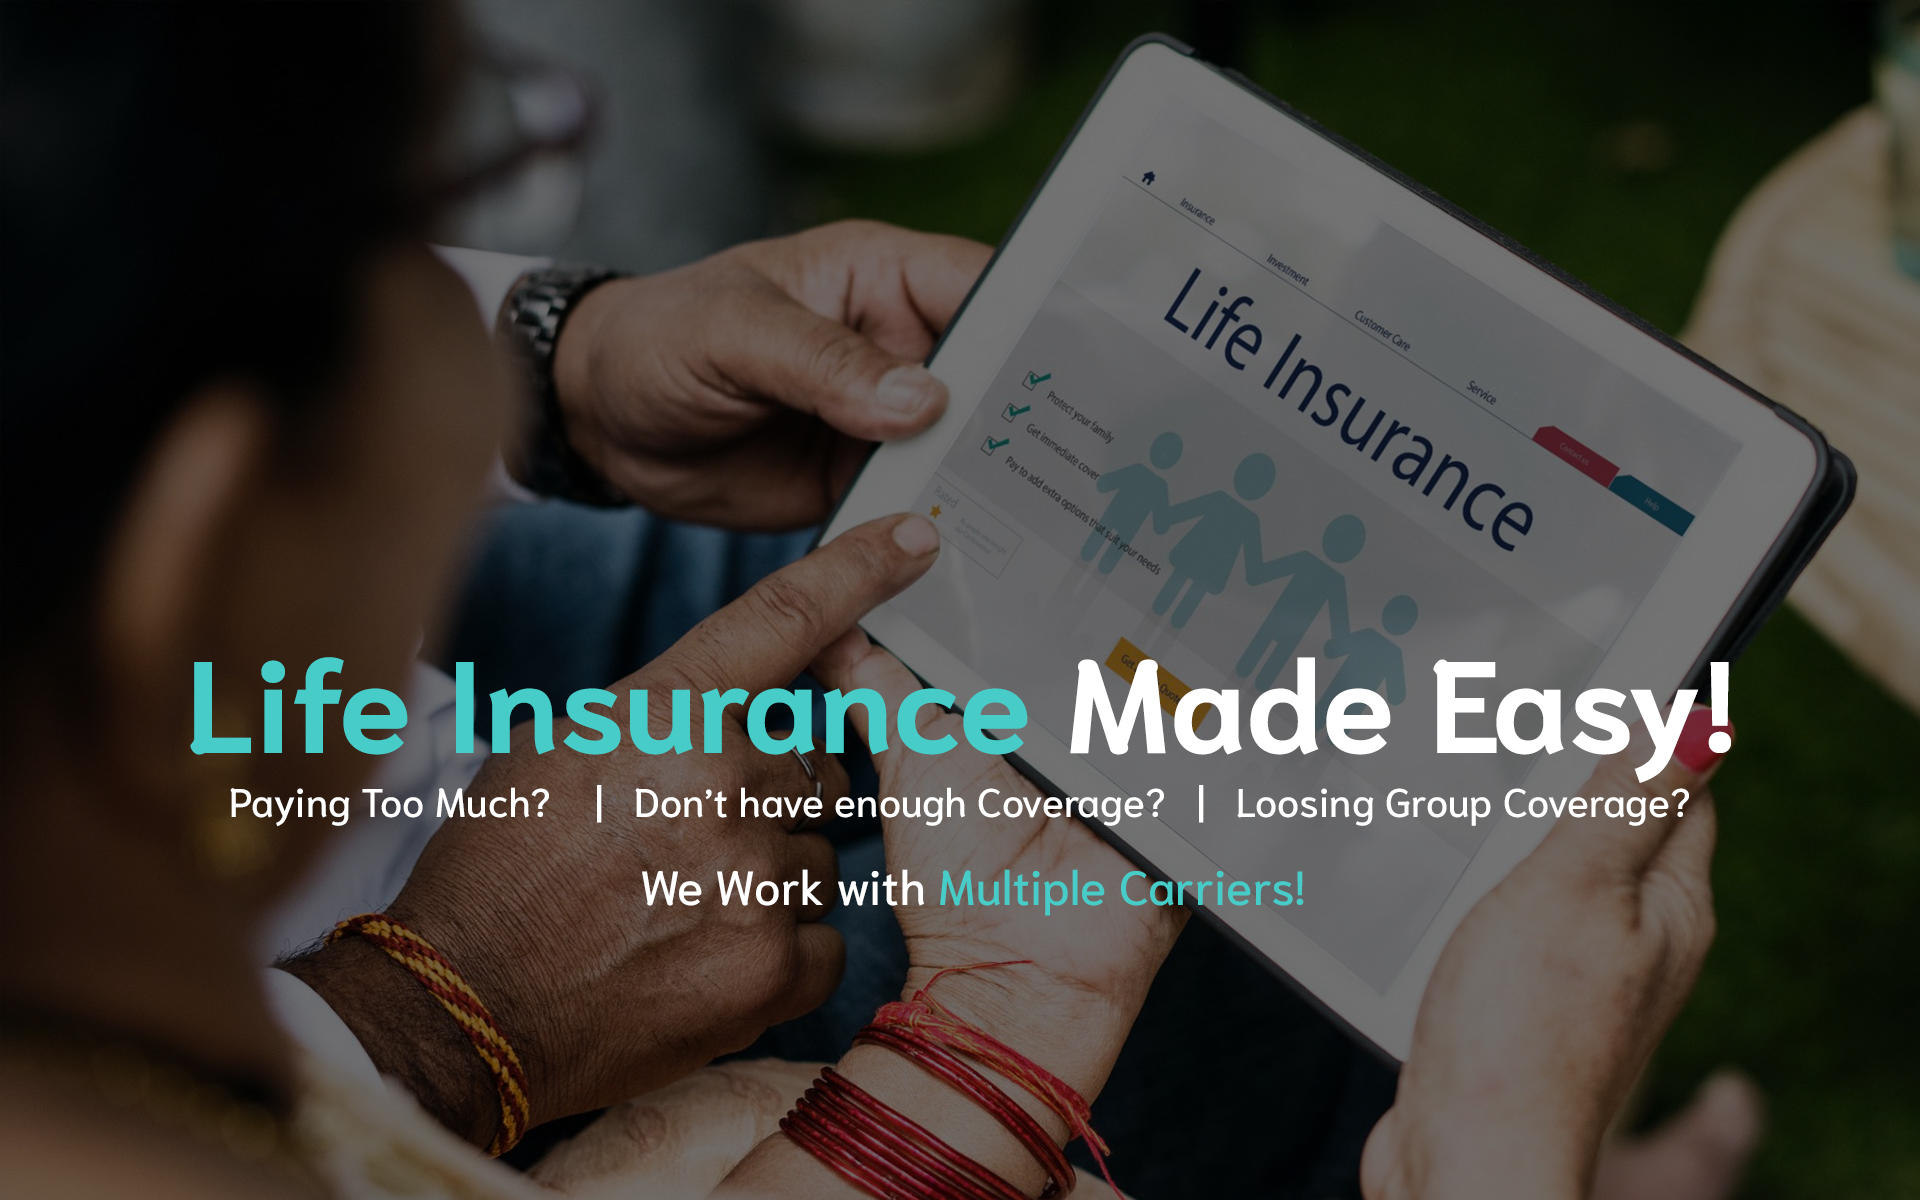 Just Us Insurance Services, Inc.